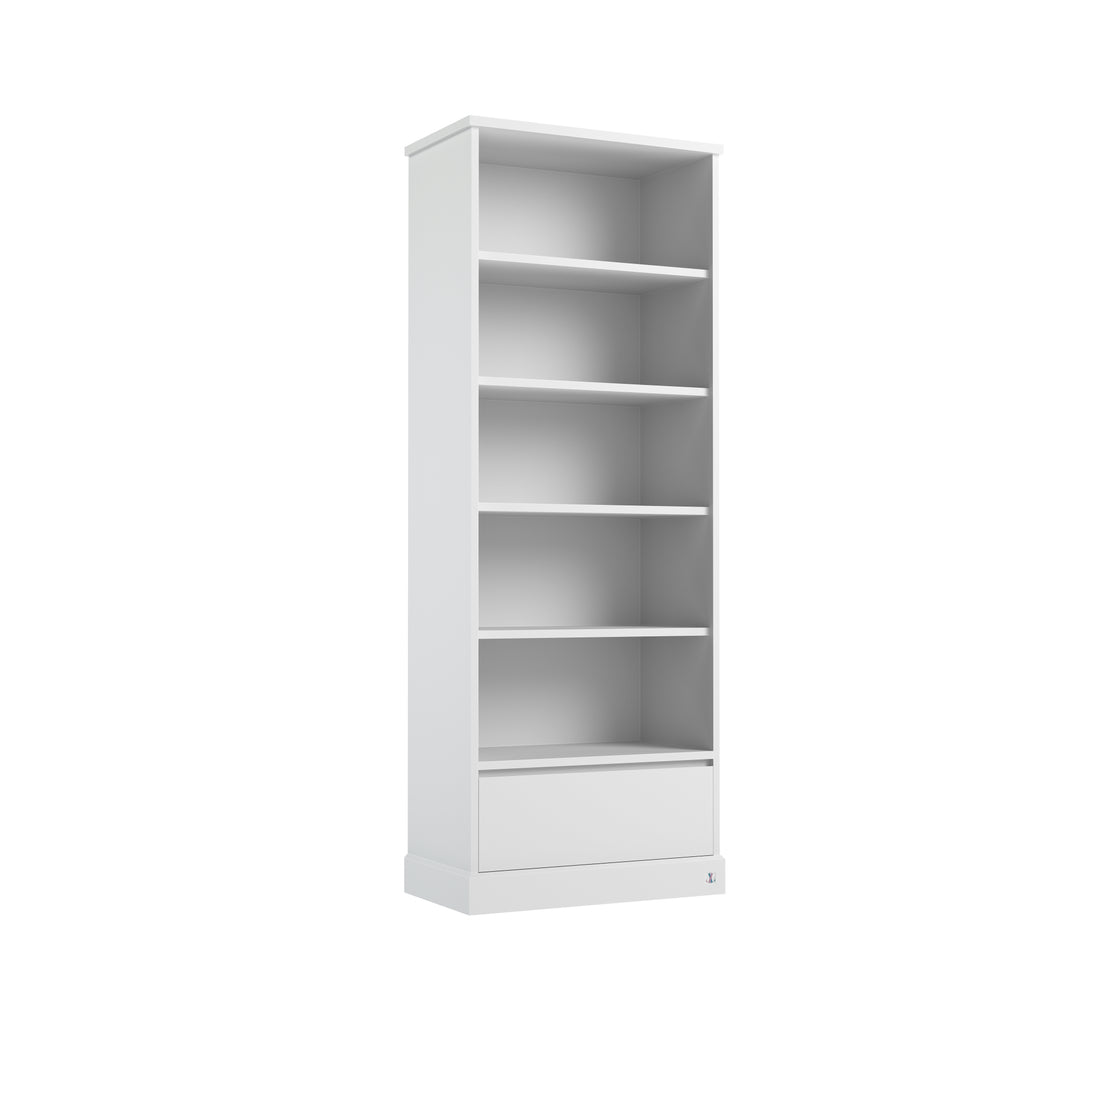 Bookcase PRESTIGE with drawer in white | Modern bookcase for children room | Baby room furniture | Bookcase baby room | White bookcase | Bookcase modern design